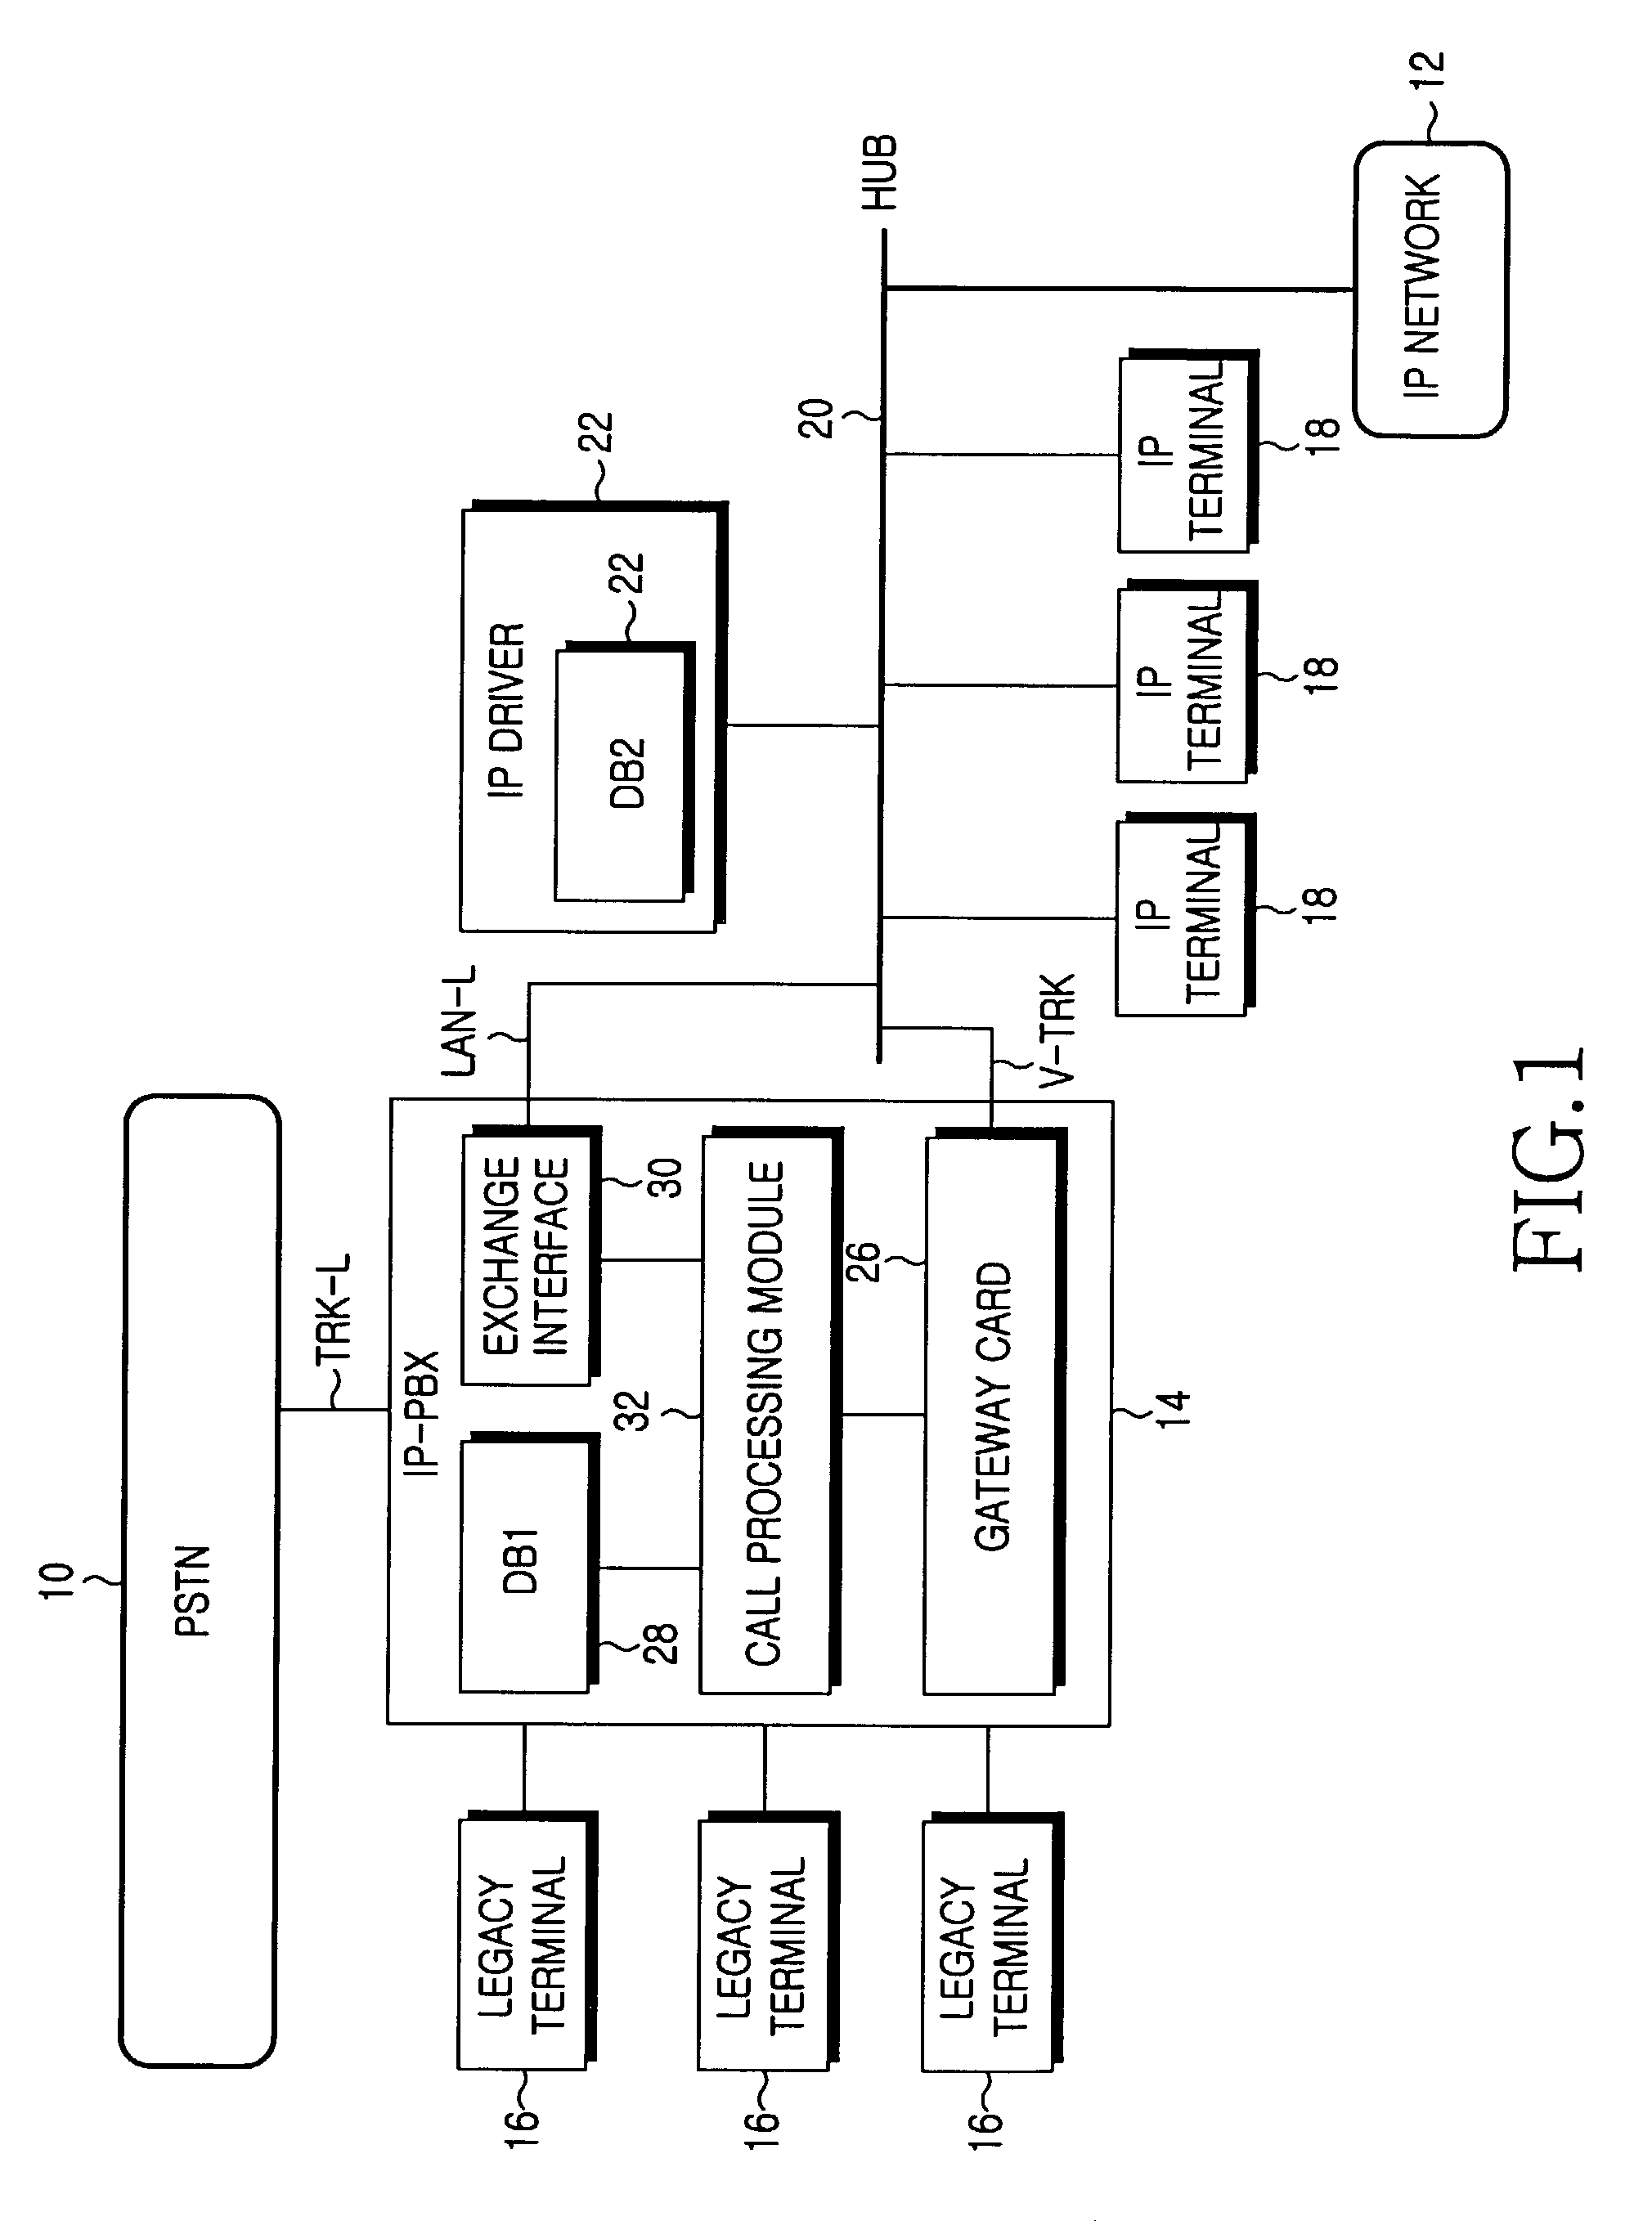 Method and apparatus for serving of station group in internet protocol telephony exchange system